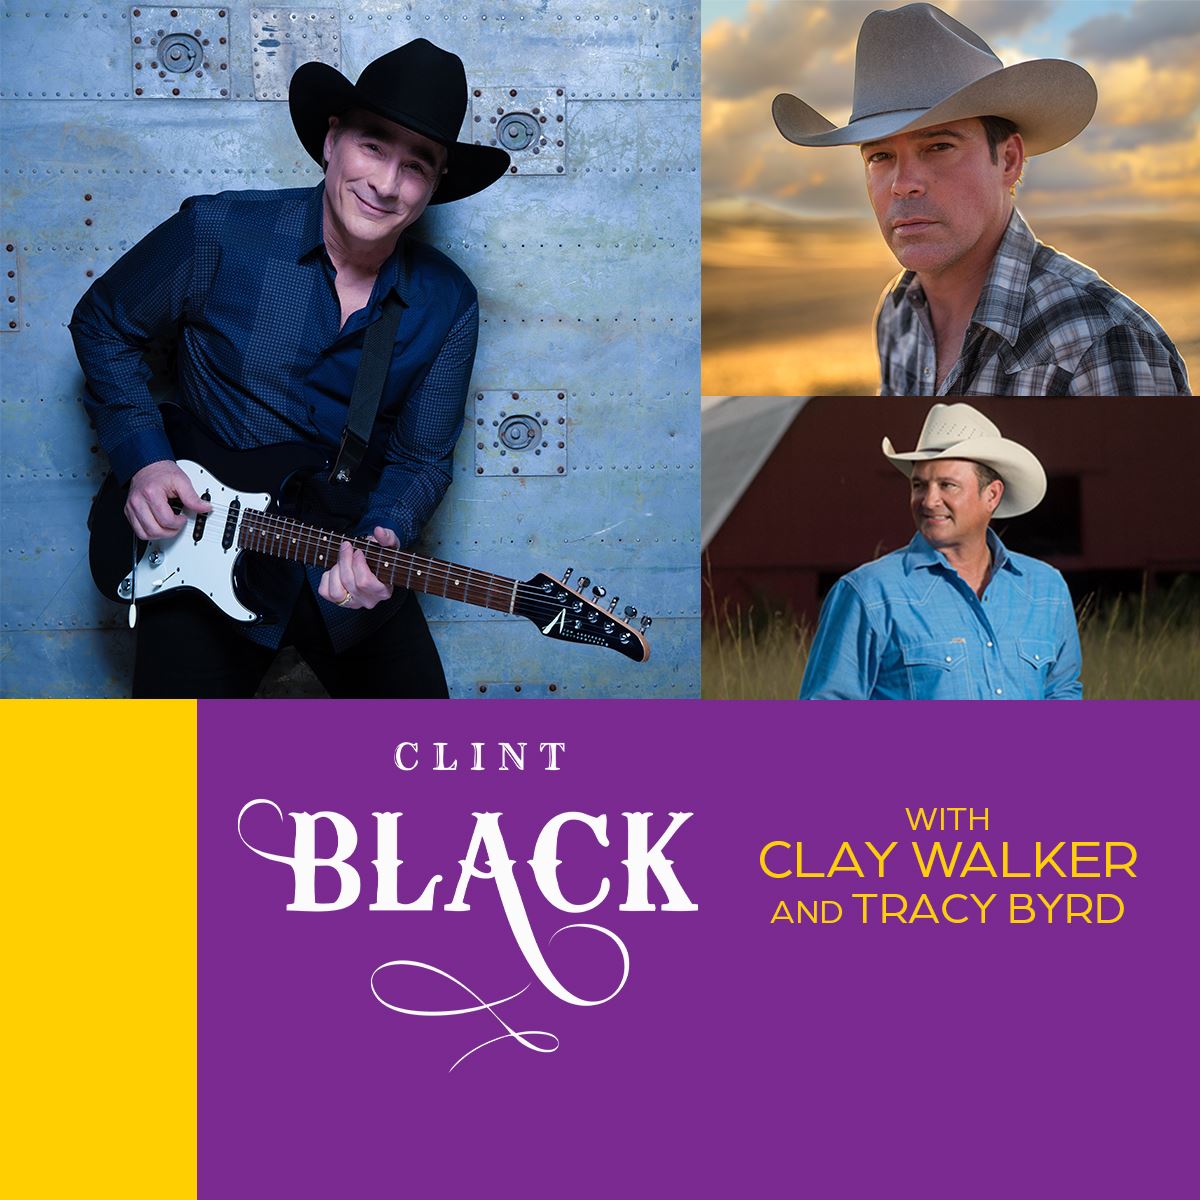 Clint Black with Clay Walker and Tracy Byrd